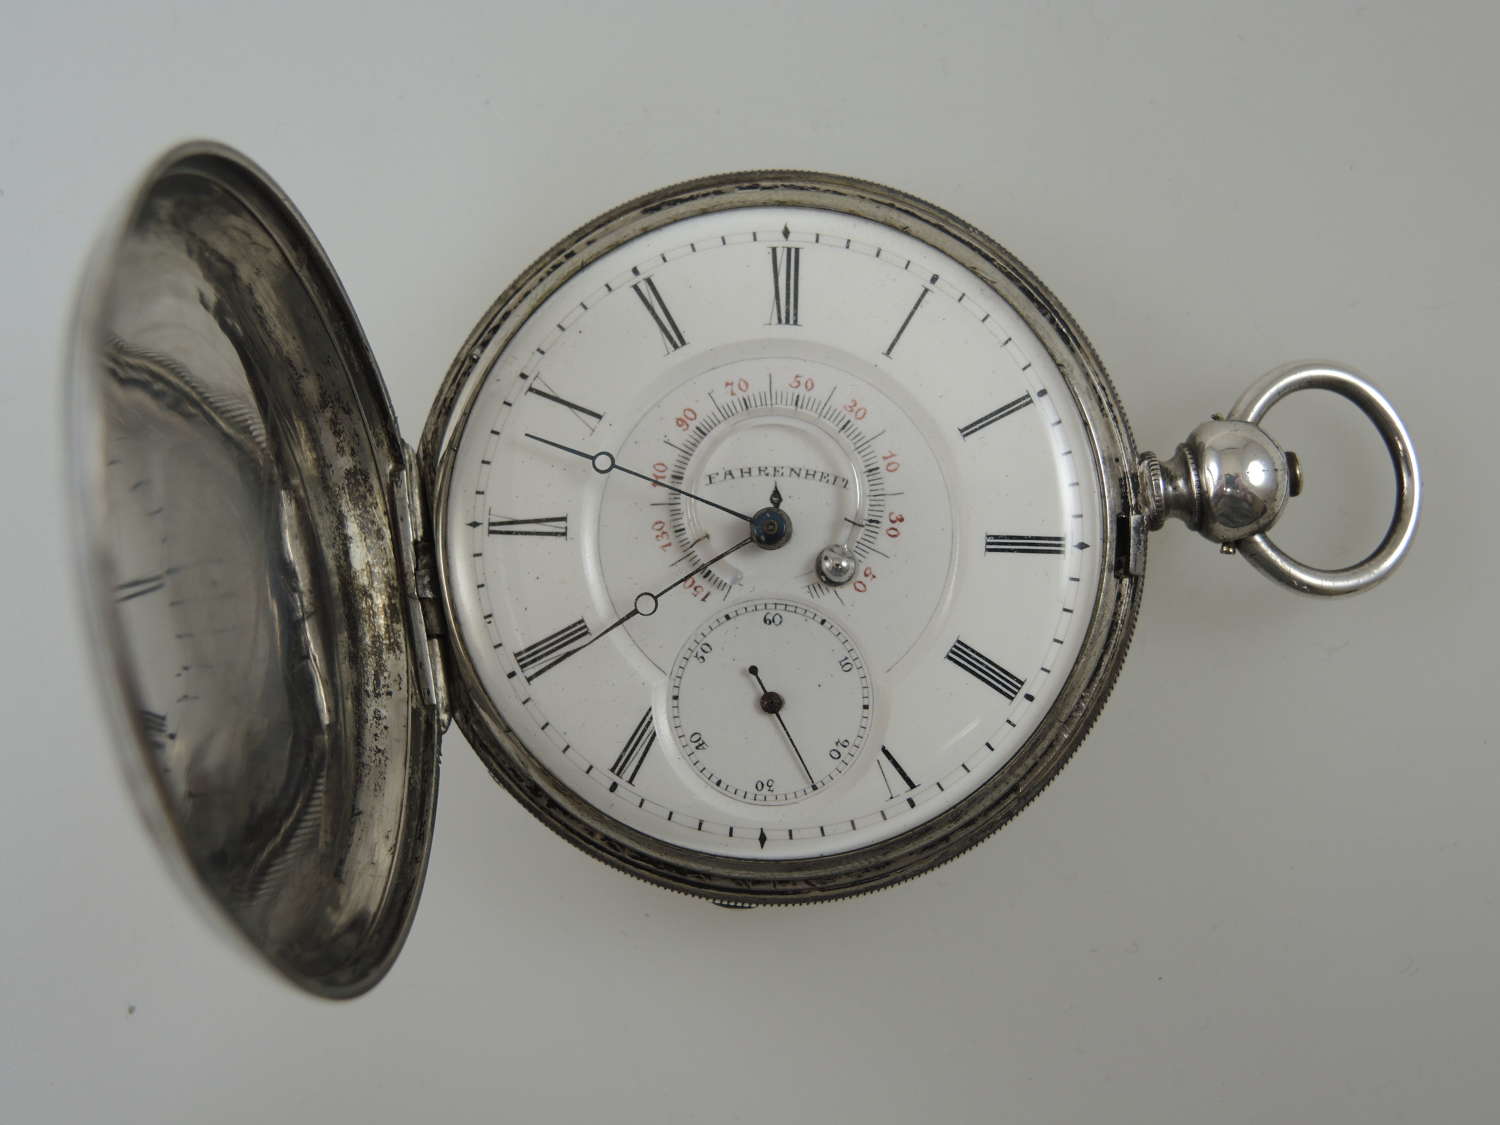 Rare silver hunter pocket watch with a THERMOMETER dial c1850